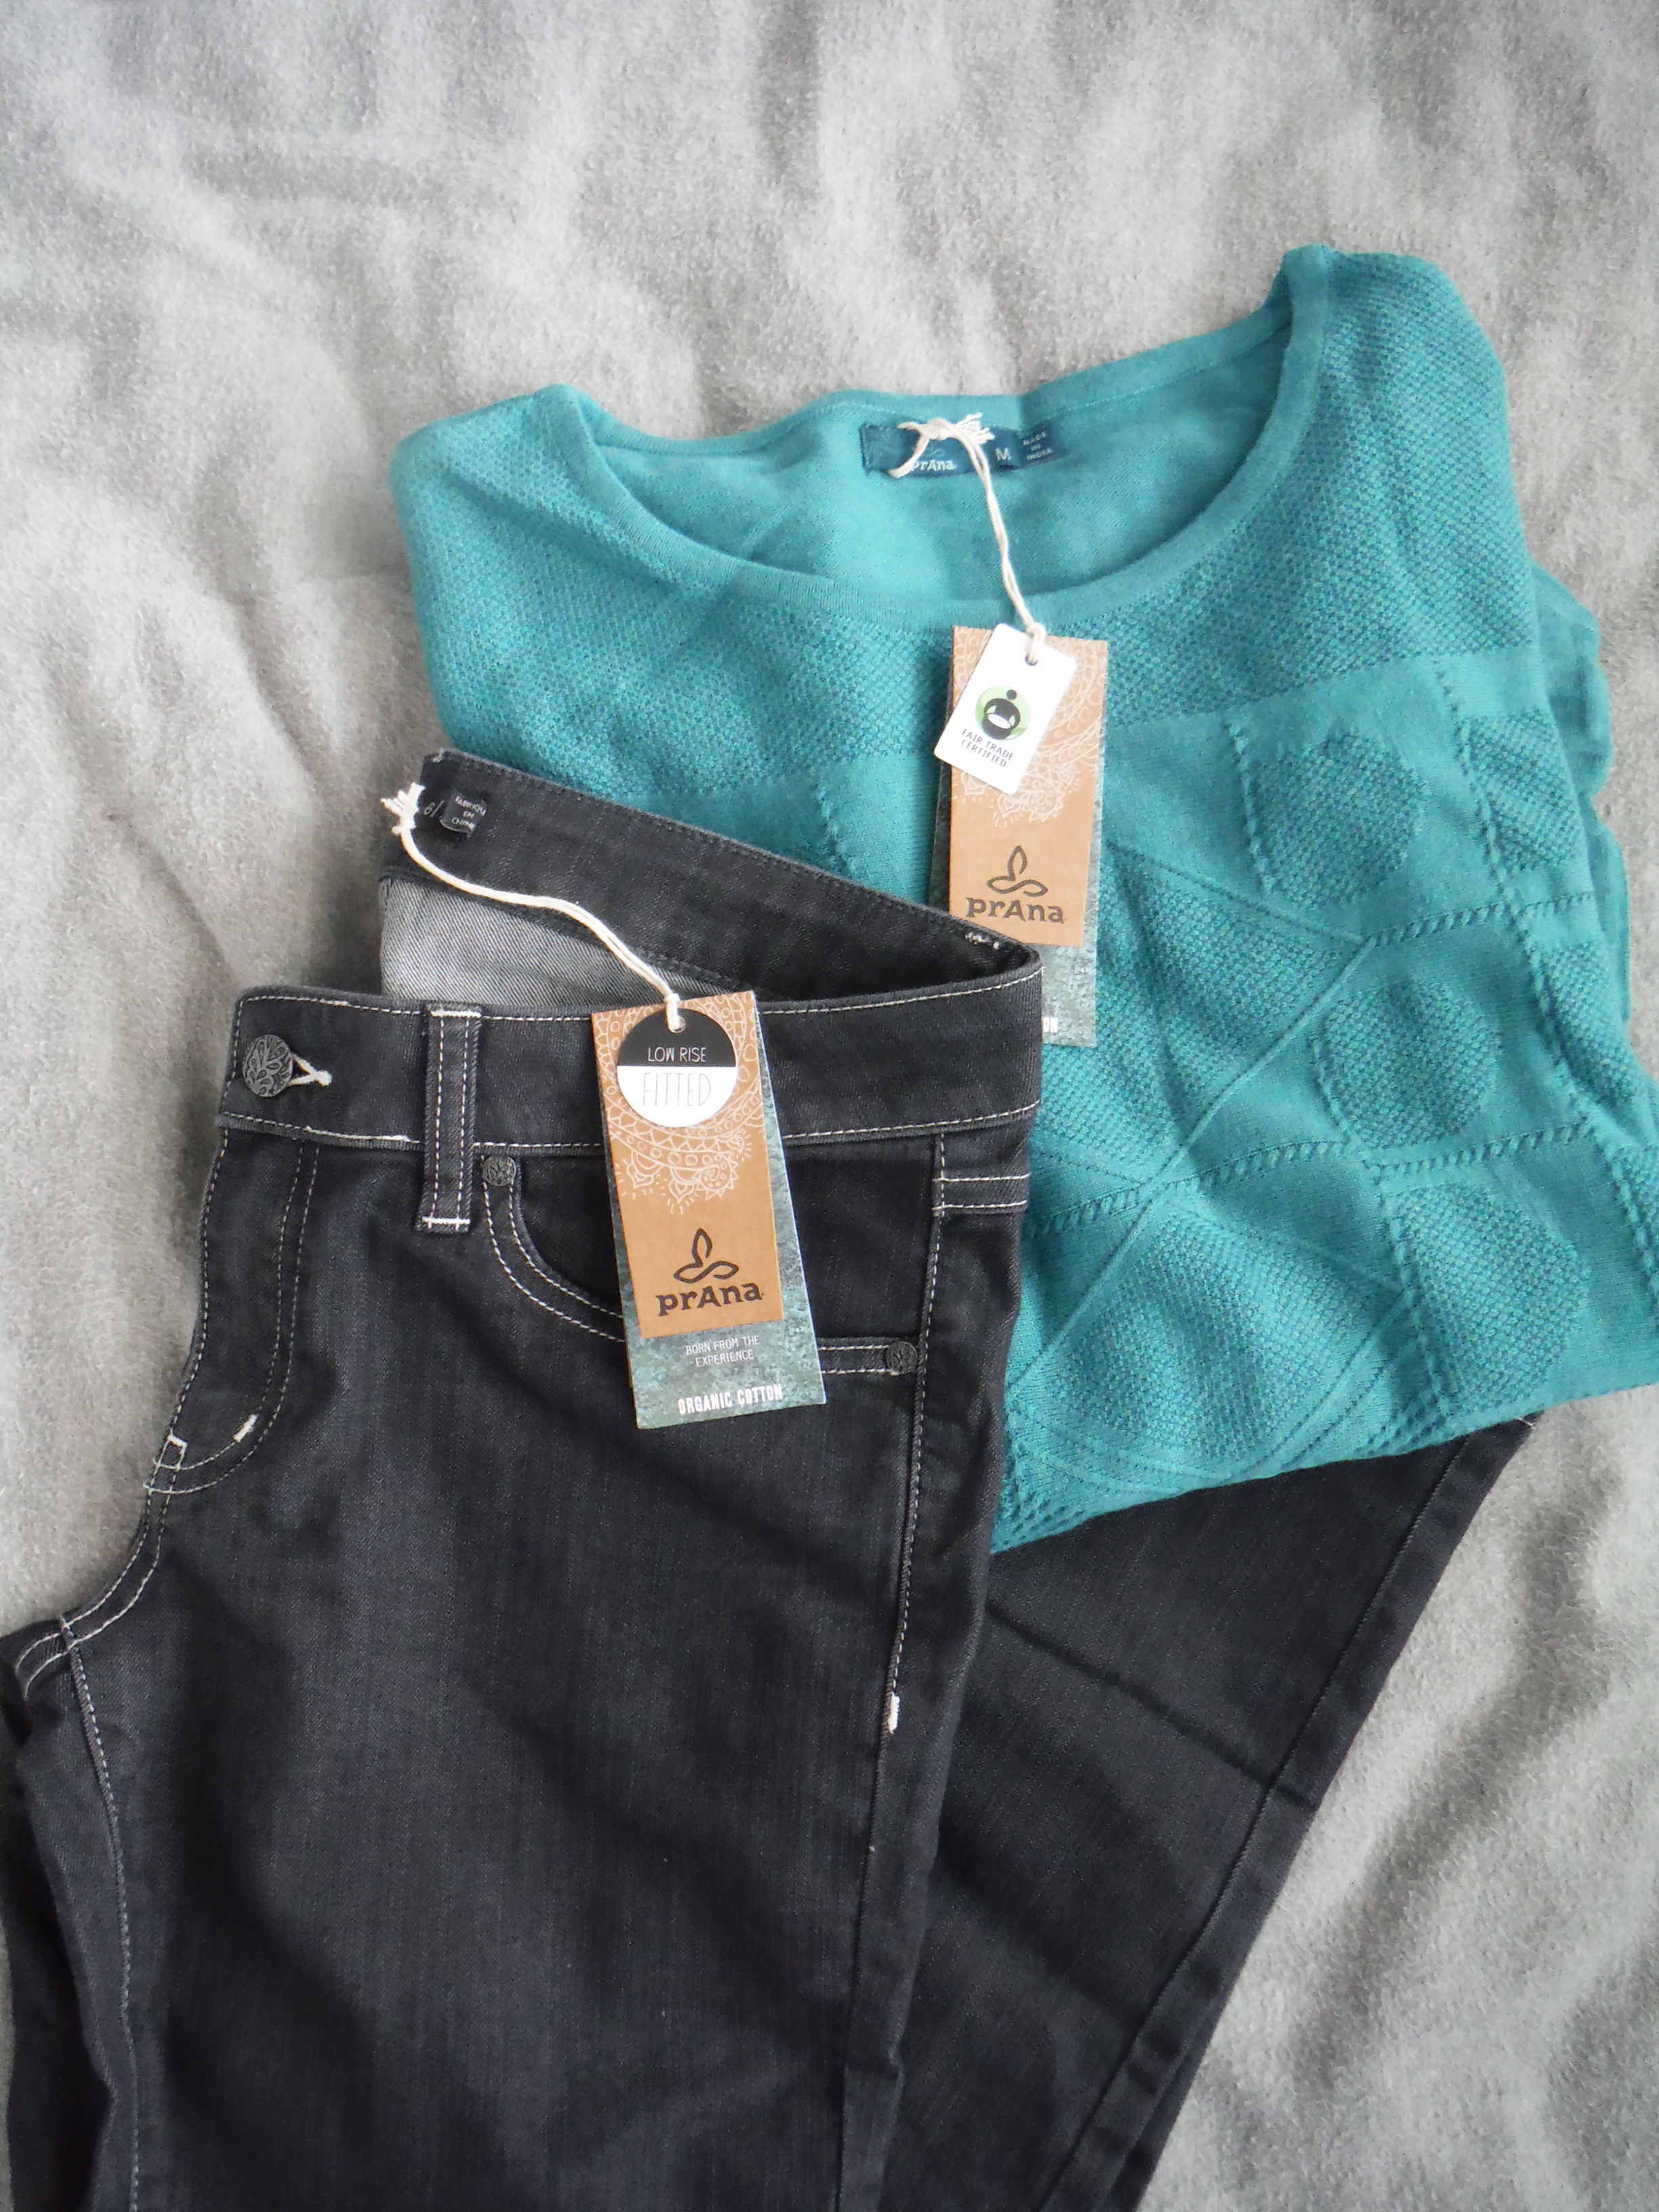 prAna jeans and sweater